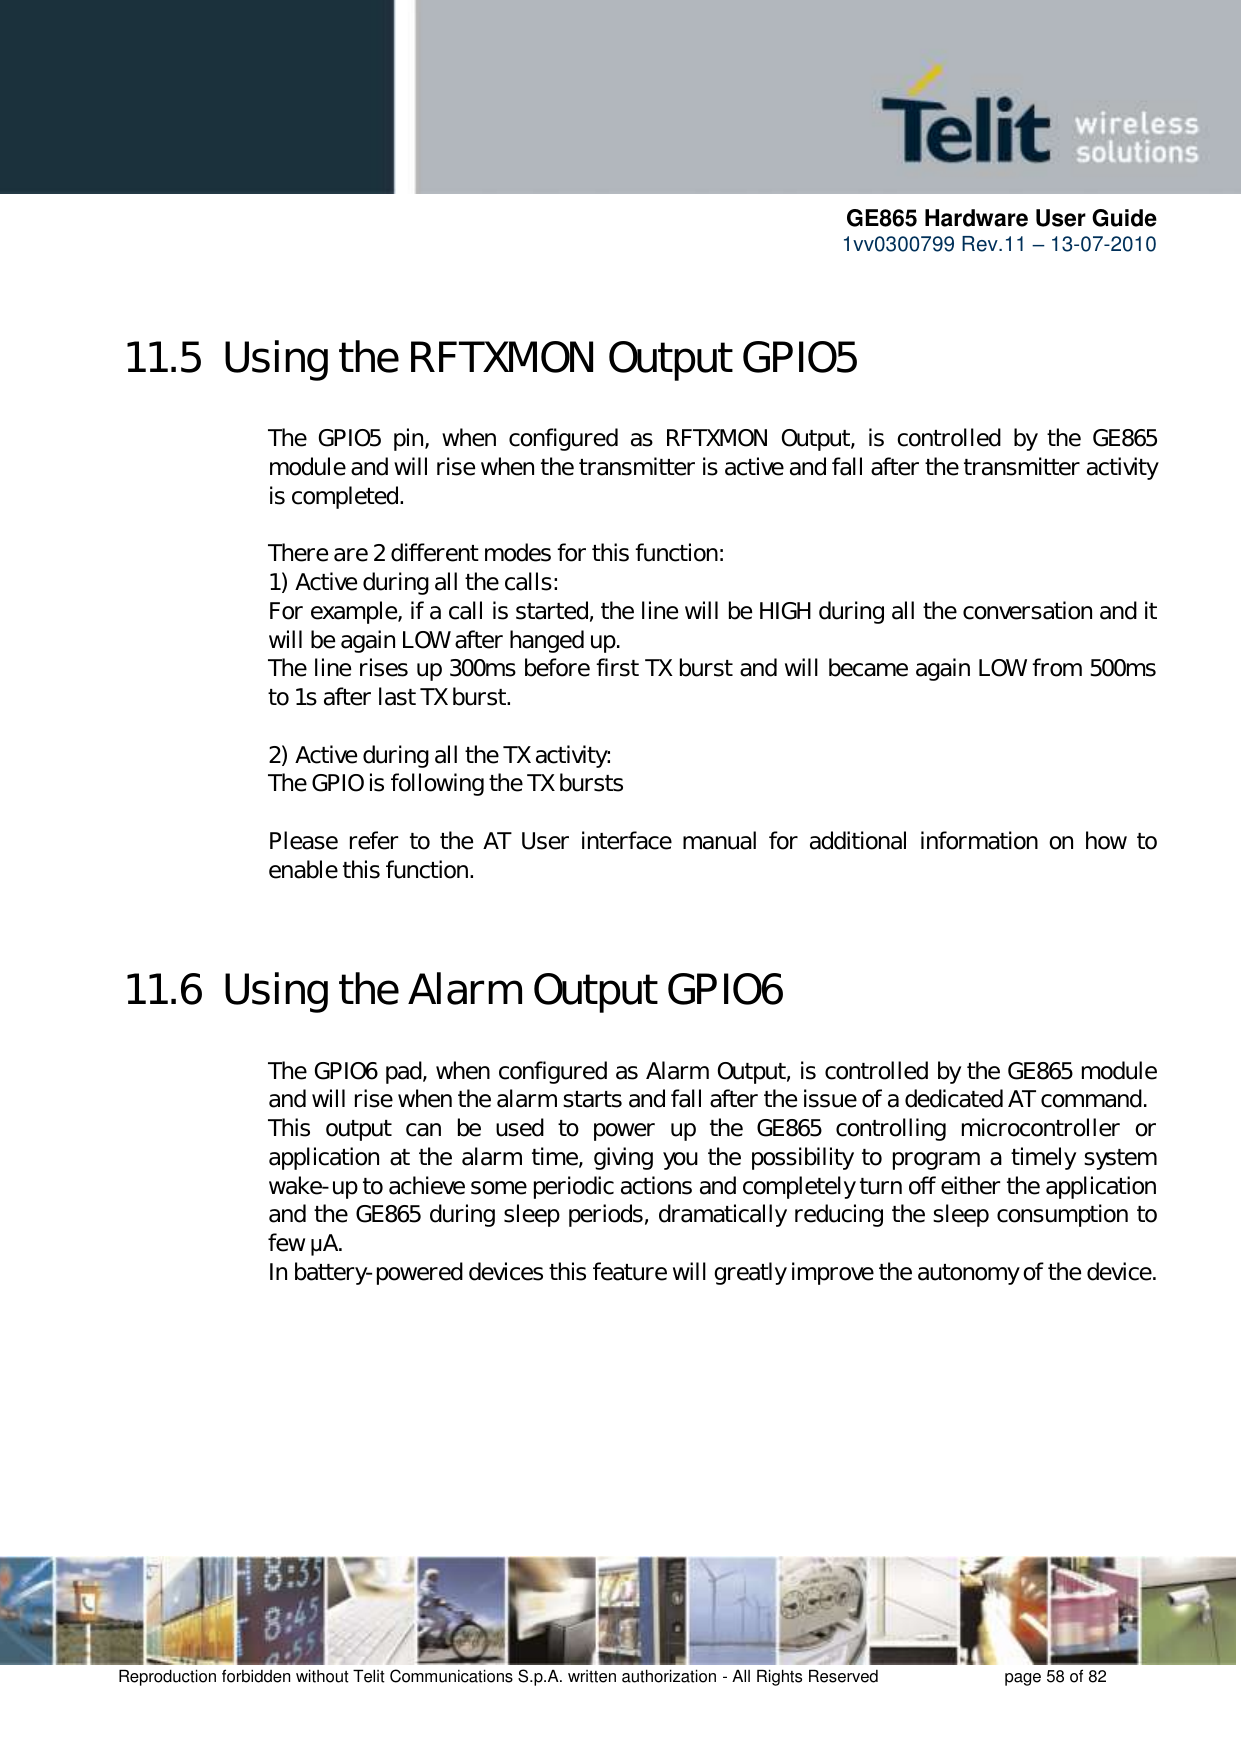      GE865 Hardware User Guide 1vv0300799 Rev.11 – 13-07-2010       Reproduction forbidden without Telit Communications S.p.A. written authorization - All Rights Reserved    page 58 of 82  11.5  Using the RFTXMON Output GPIO5  The  GPIO5  pin,  when  configured  as  RFTXMON  Output,  is  controlled  by  the  GE865 module and will rise when the transmitter is active and fall after the transmitter activity is completed.  There are 2 different modes for this function: 1) Active during all the calls: For example, if a call is started, the line will be HIGH during all the conversation and it will be again LOW after hanged up. The line rises up 300ms before first TX burst and will became again LOW from 500ms to 1s after last TX burst.  2) Active during all the TX activity: The GPIO is following the TX bursts  Please refer  to the  AT User  interface  manual  for  additional information on  how  to enable this function.  11.6  Using the Alarm Output GPIO6  The GPIO6 pad, when configured as Alarm Output, is controlled by the GE865 module and will rise when the alarm starts and fall after the issue of a dedicated AT command. This  output  can  be  used  to  power  up  the  GE865  controlling  microcontroller  or application at the alarm time, giving you the possibility to program a timely system wake-up to achieve some periodic actions and completely turn off either the application and the GE865 during sleep periods, dramatically reducing the sleep consumption to few μA. In battery-powered devices this feature will greatly improve the autonomy of the device. 